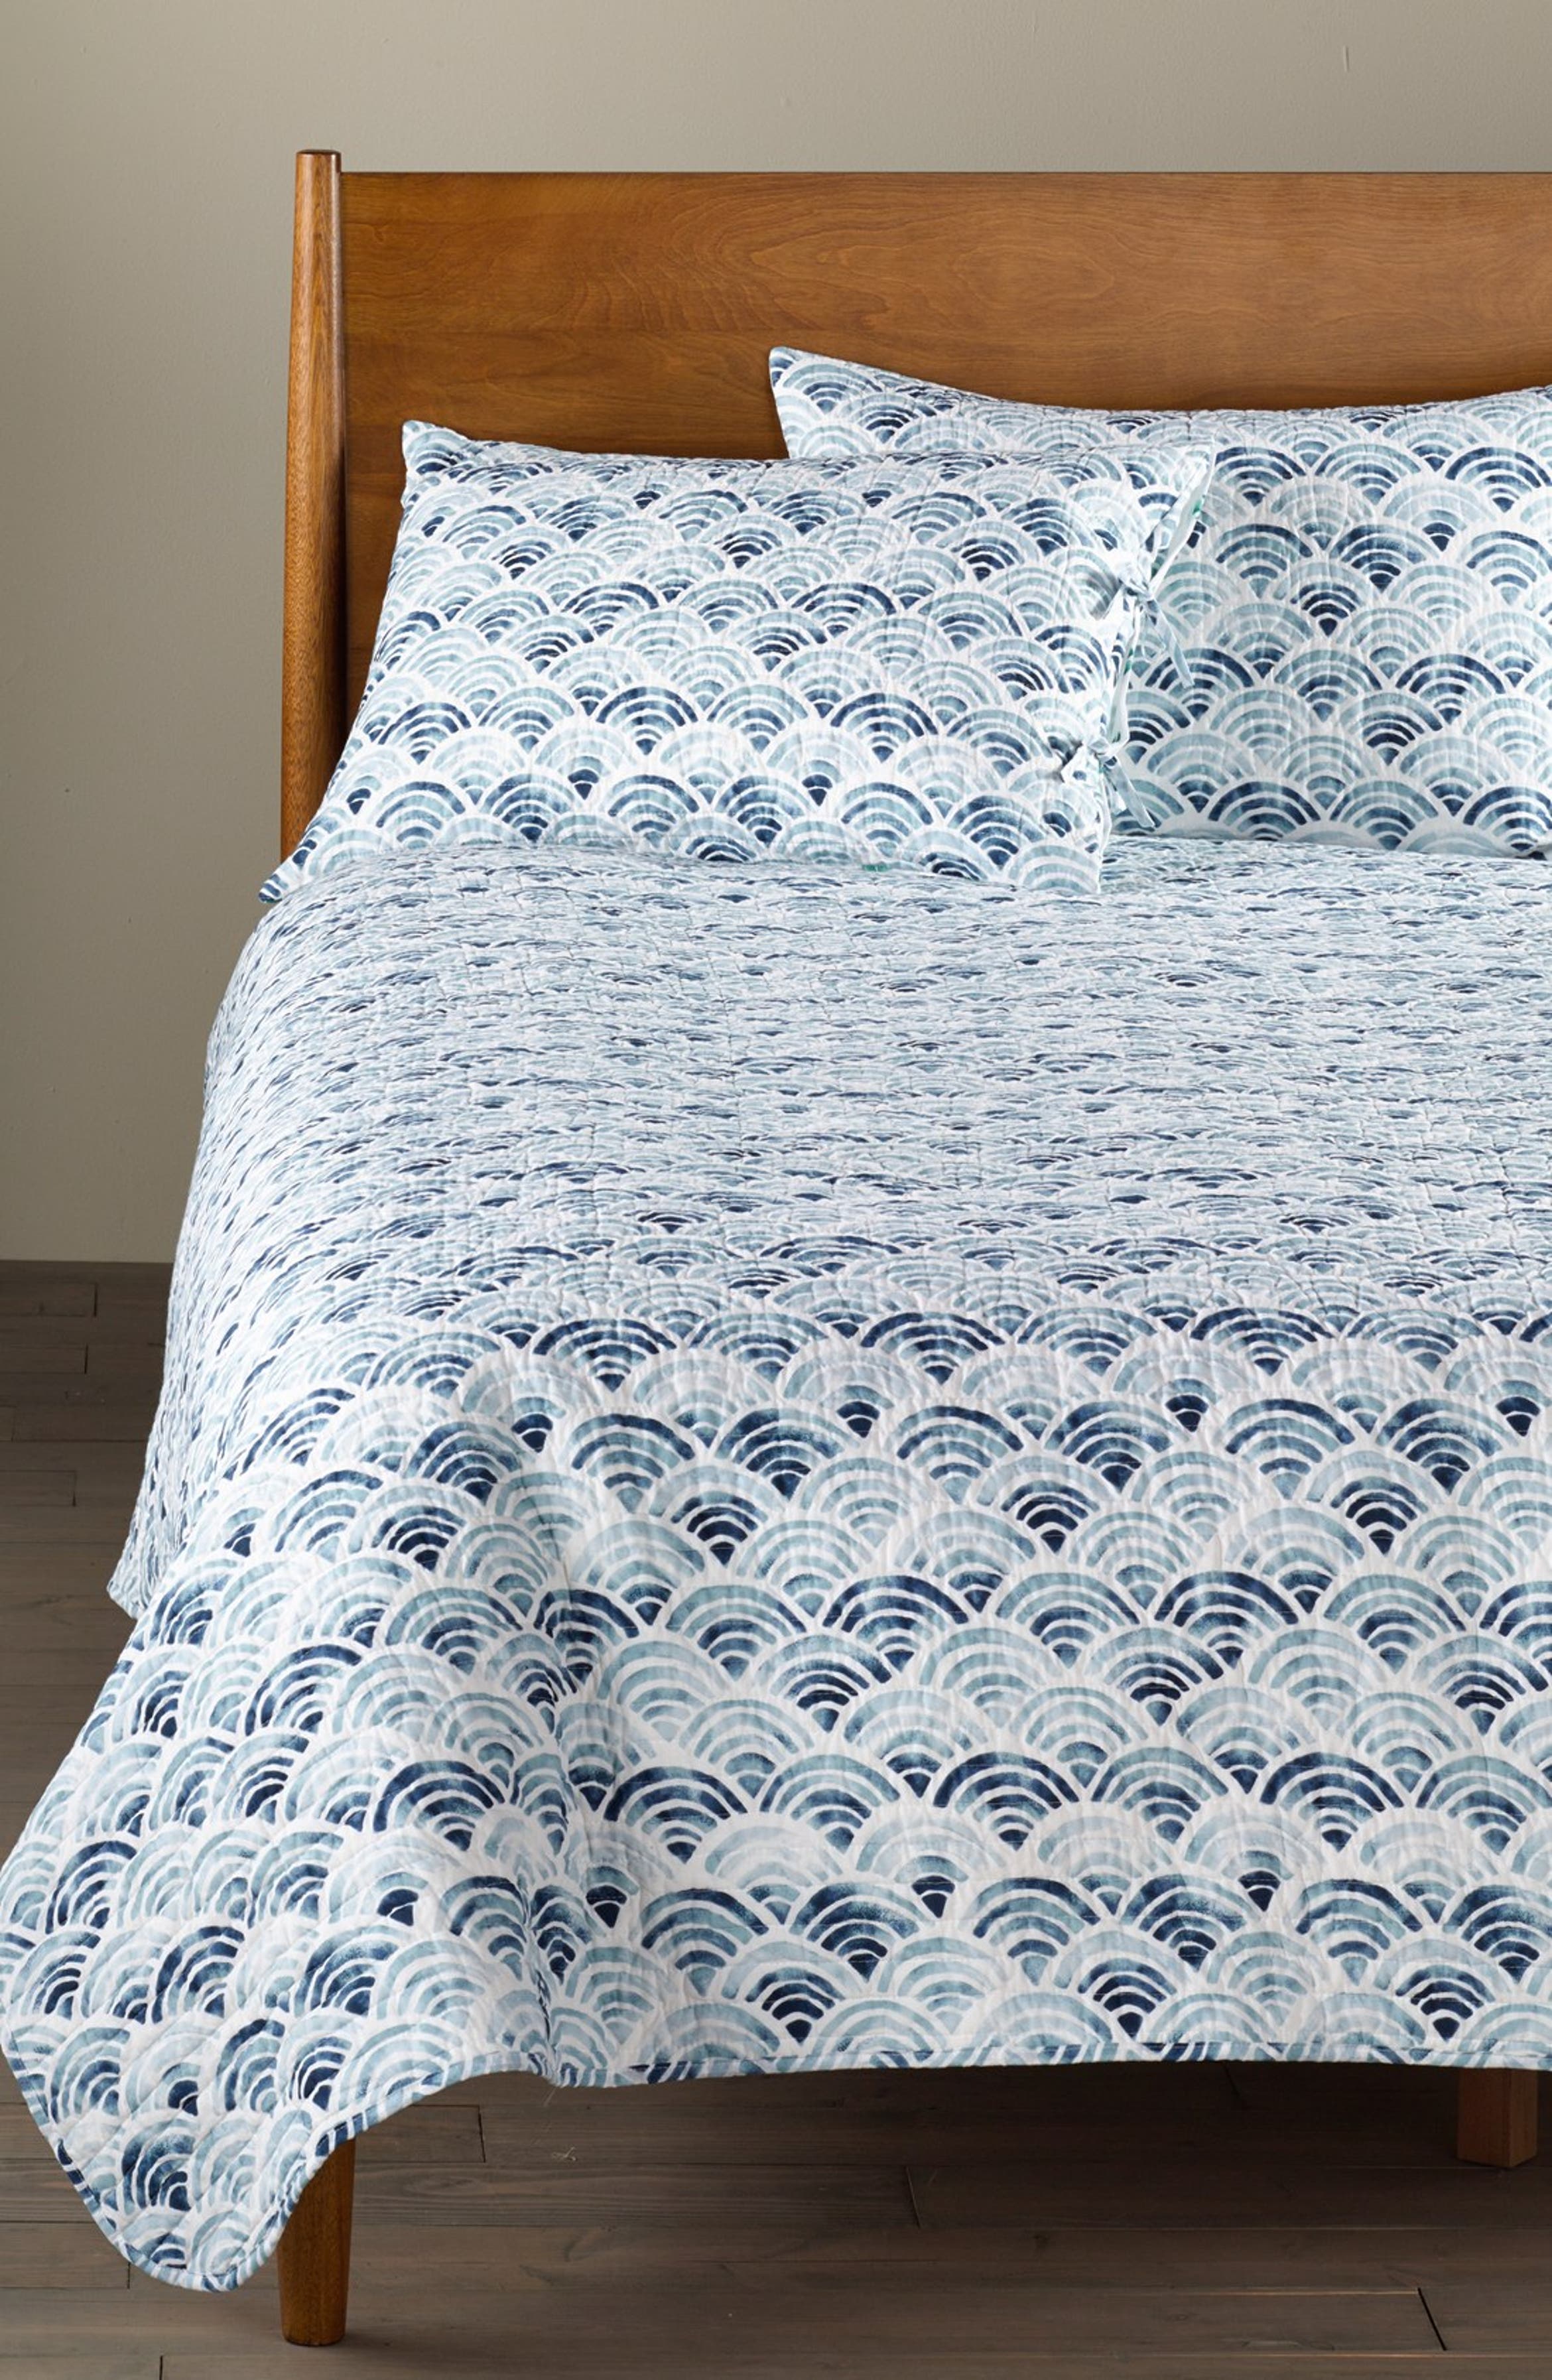 Nordstrom at Home 'Pearl' Print Reversible Cotton Quilt | Nordstrom